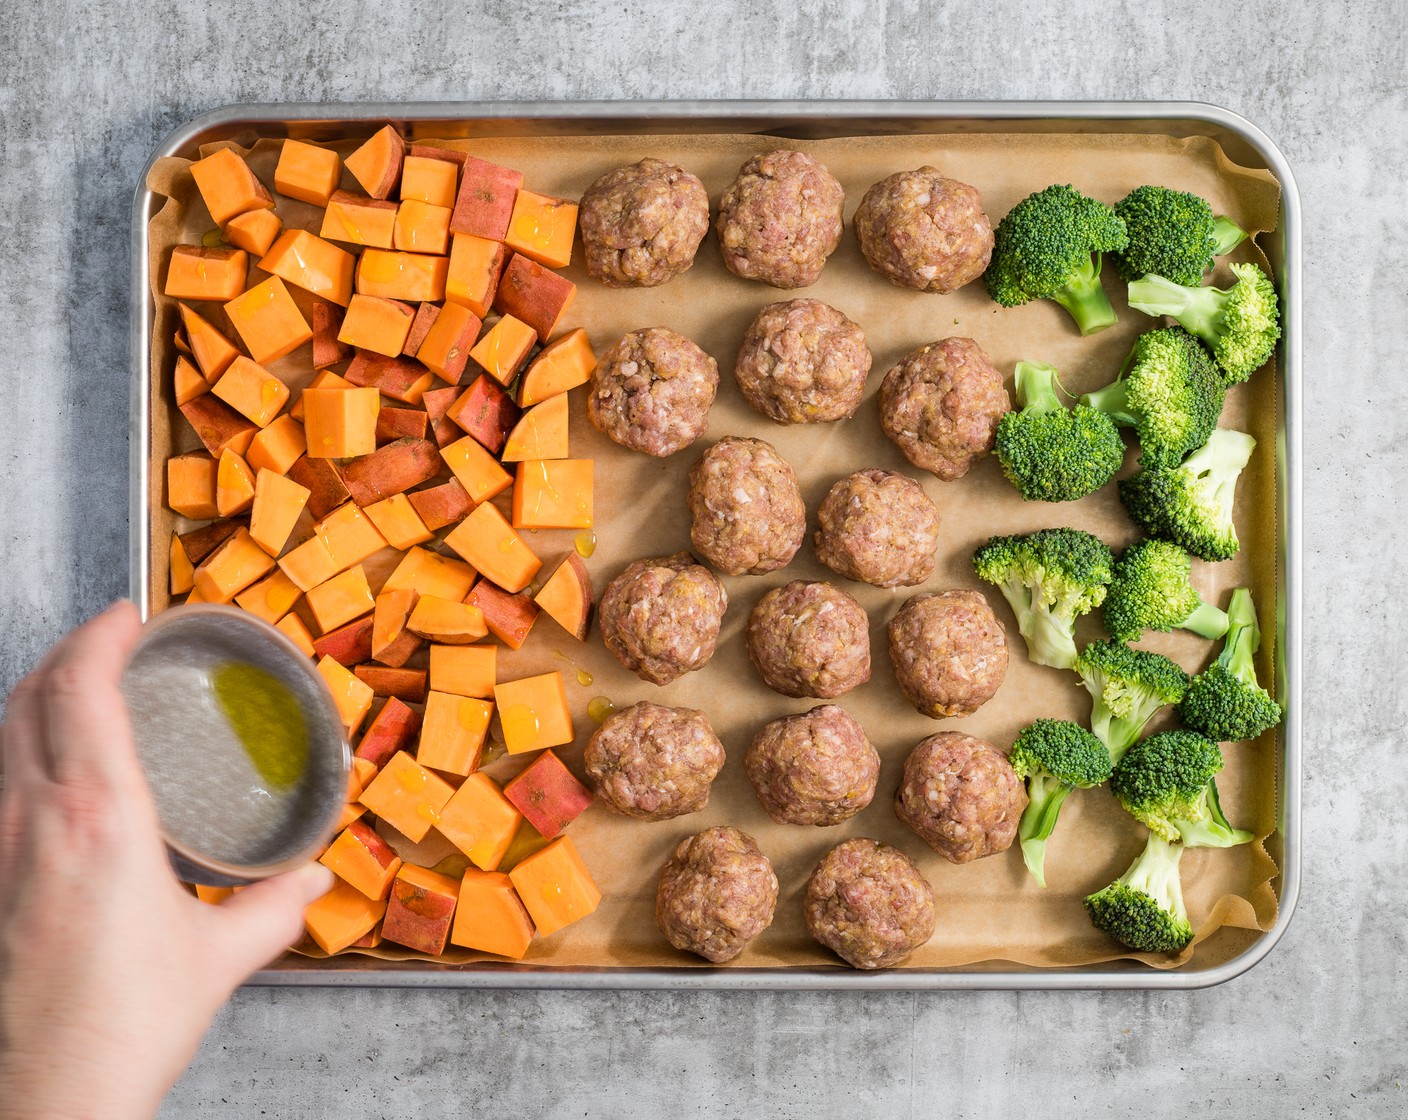 step 3 Put the Sweet Potatoes (2), Broccoli (1 head), and meatballs onto the lined pan, making a separate section for each ingredient. Drizzle the vegetables with the Olive Oil (1 Tbsp) and sprinkle with Kosher Salt (1 tsp).